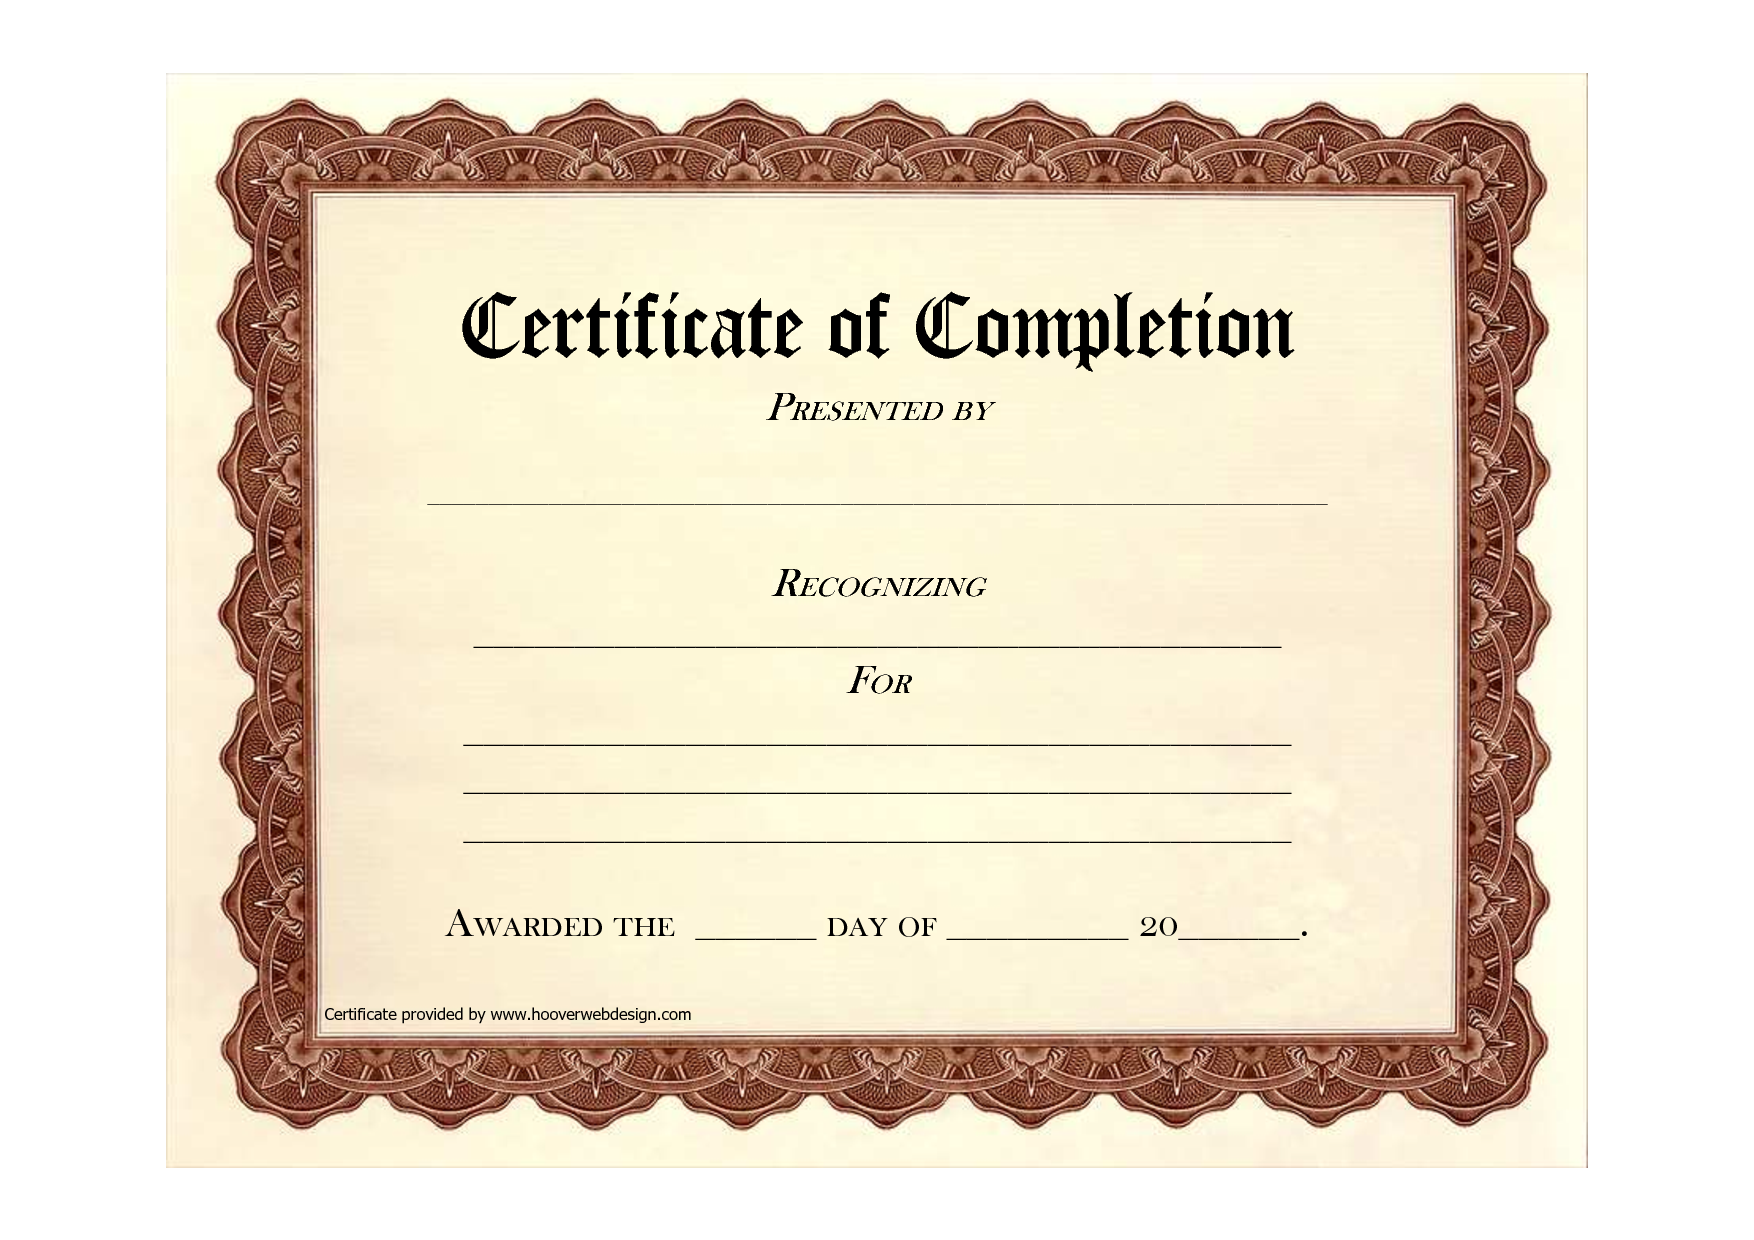 10 Certificate Of Completion Templates Free Download Images Free Word Certificate Completion Templates Blank Completion Certificates Templates Free And Microsoft Word Certificate Completion Templates Newdesignfile Com